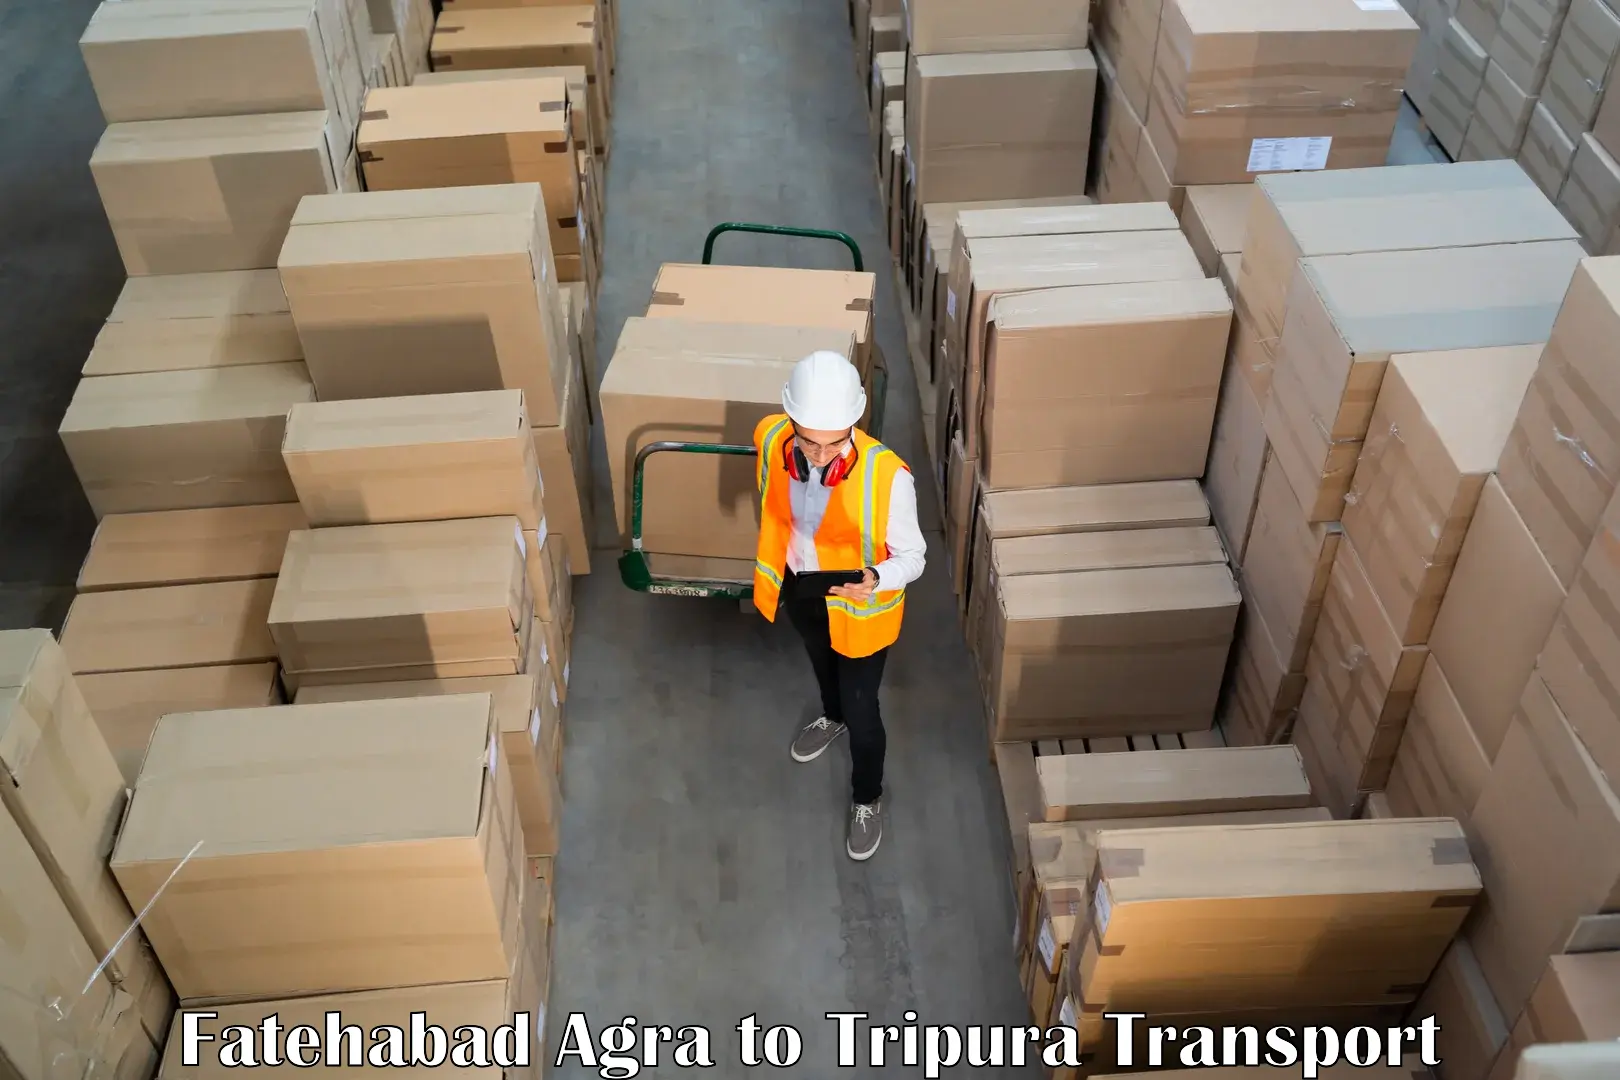 Cargo train transport services in Fatehabad Agra to Tripura